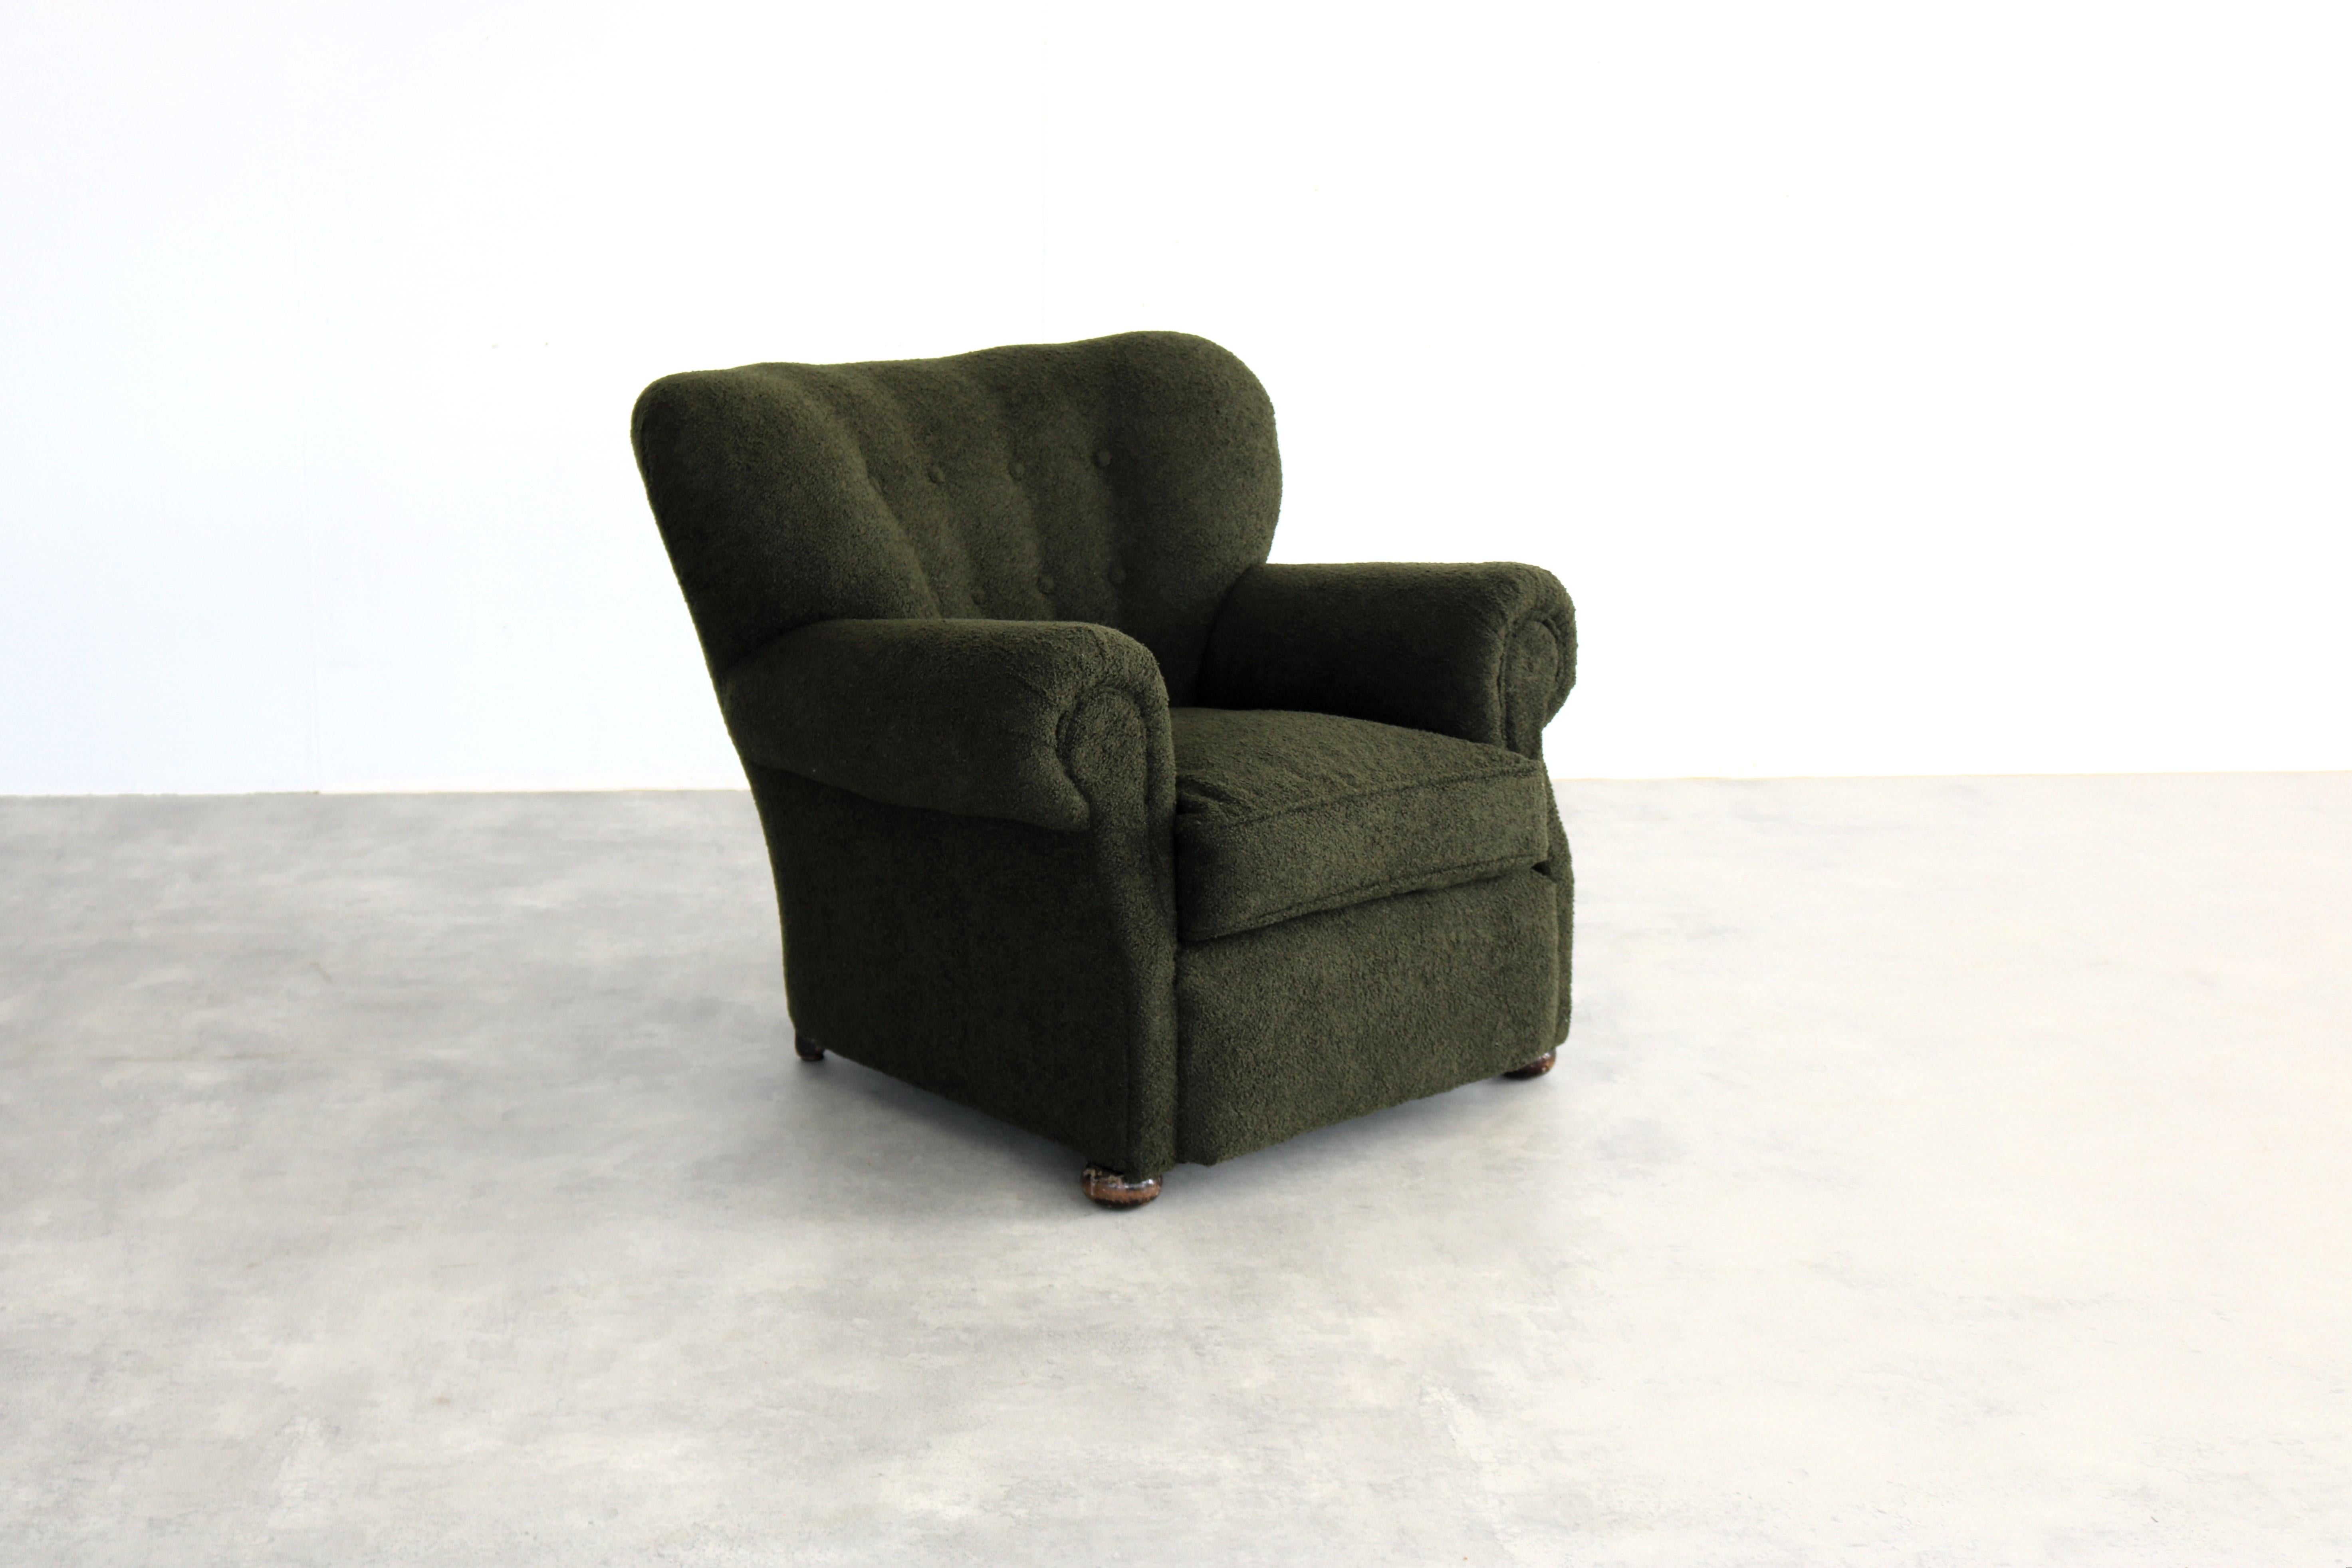 comfy green chair